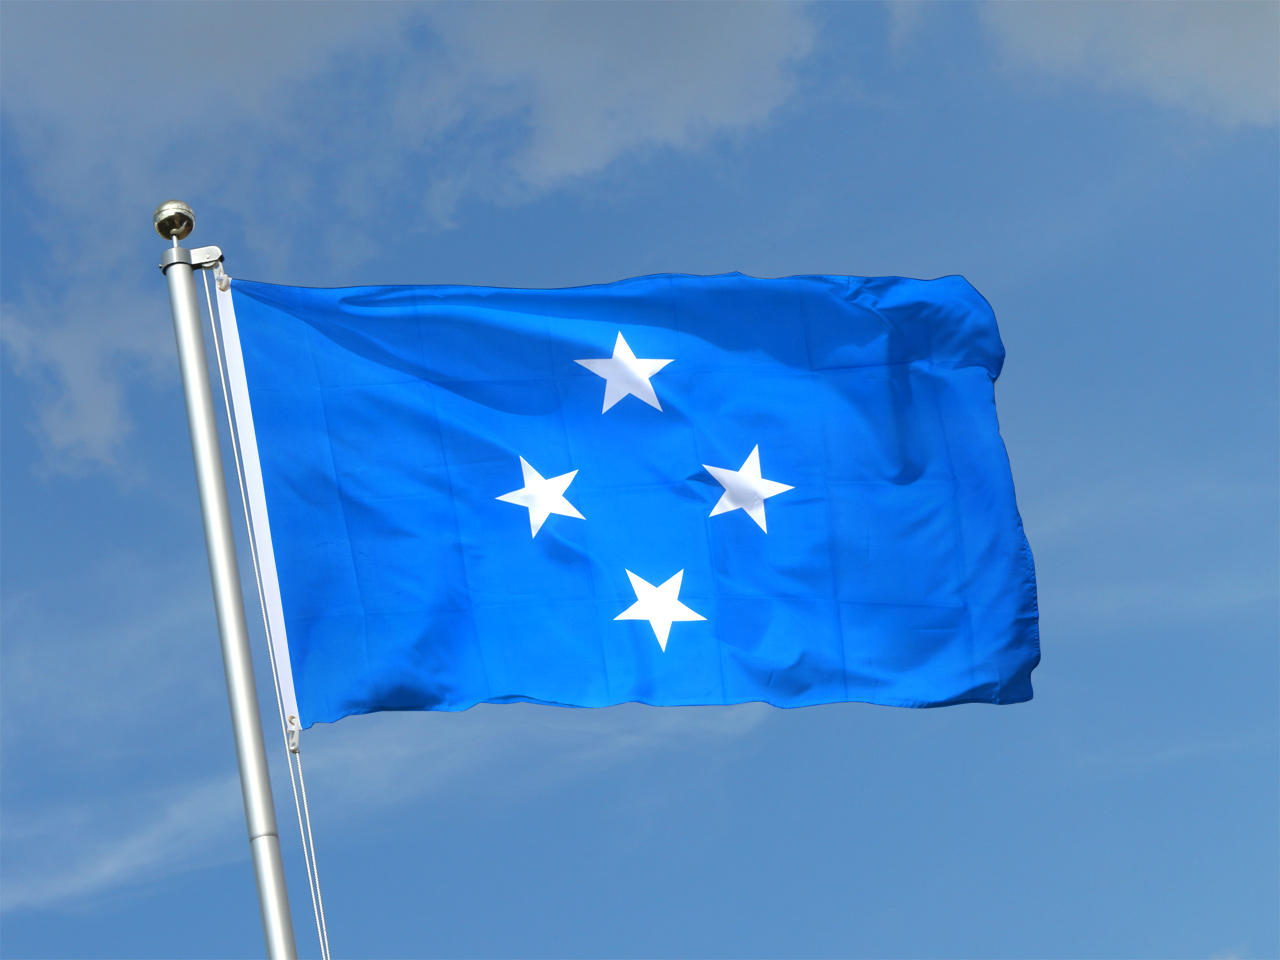 Micronesia Flag for Sale - Buy online at Royal-Flags